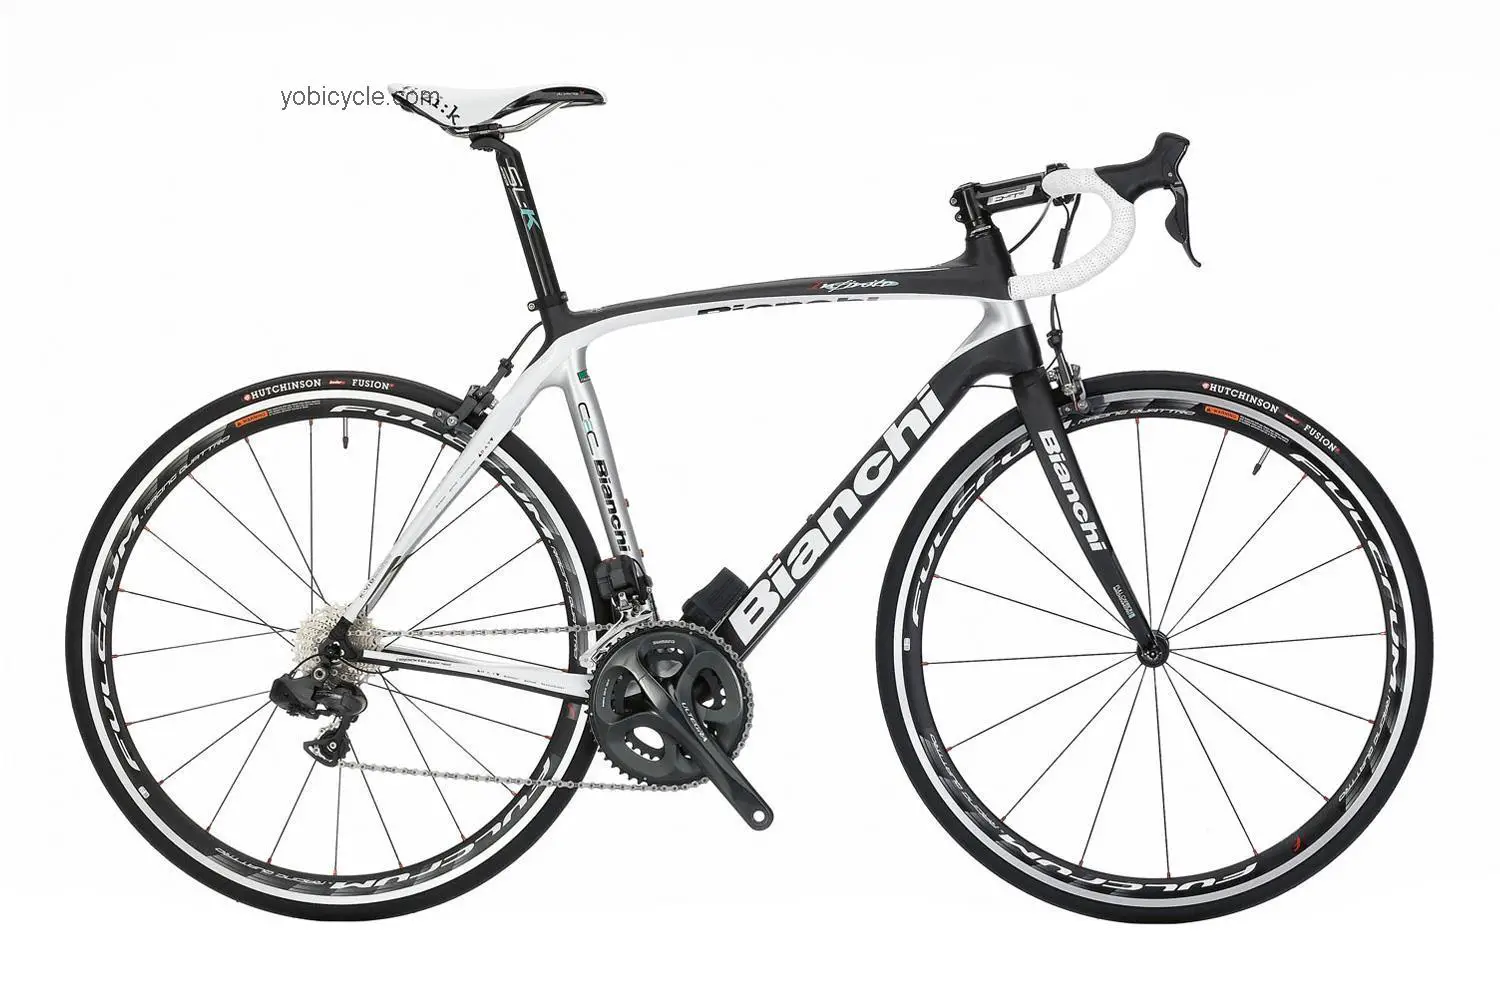 Bianchi  Infinito Ultegra Di2 Technical data and specifications